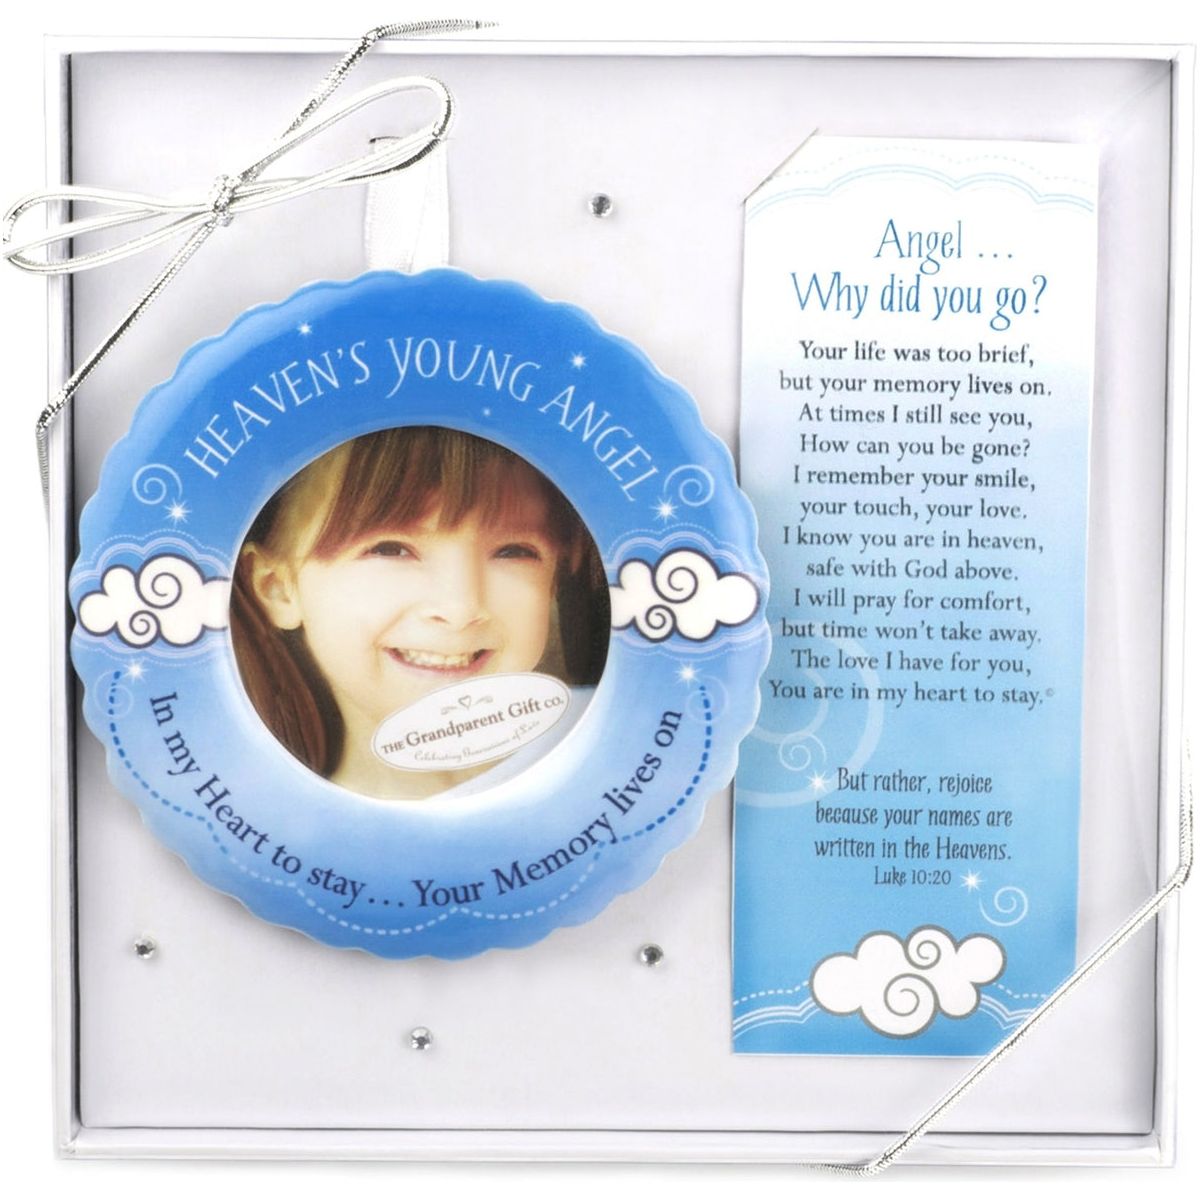 3" scalloped ceramic "Heaven's Young Angel" memorial ornament which holds 2.25 Round Photo with ribbon for hanging. Ornament is gift boxed with "Angel... Why did you go" poem in a white box with a clear lid.